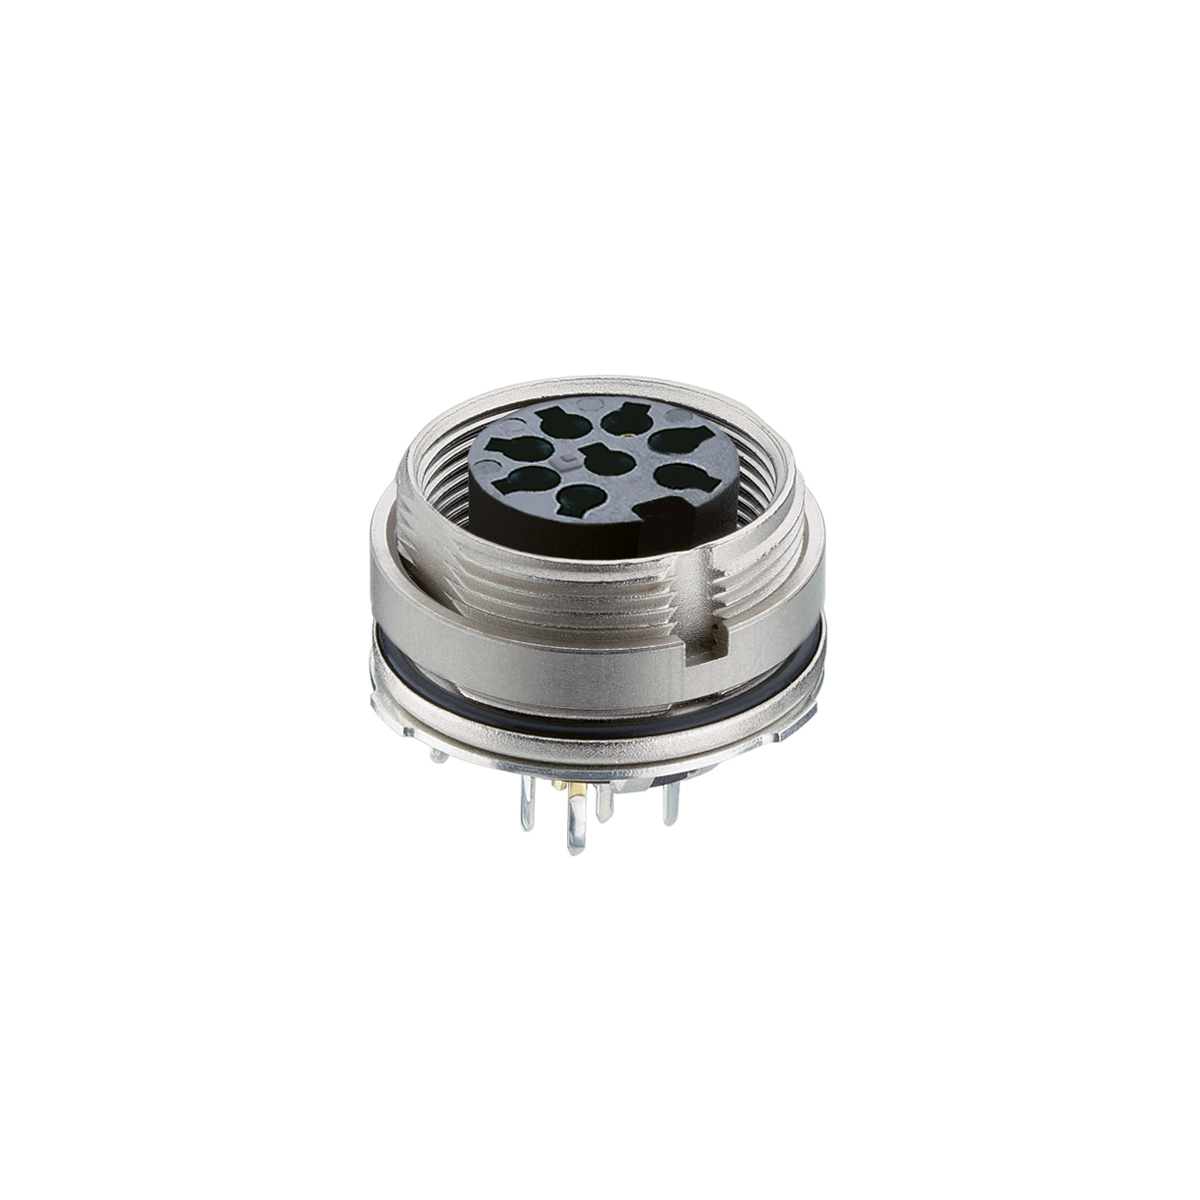 Lumberg: 030798-1 (Series 03 | Circular connectors with threaded joint M16 acc. to IEC 61076-2-106, IP40/IP68)